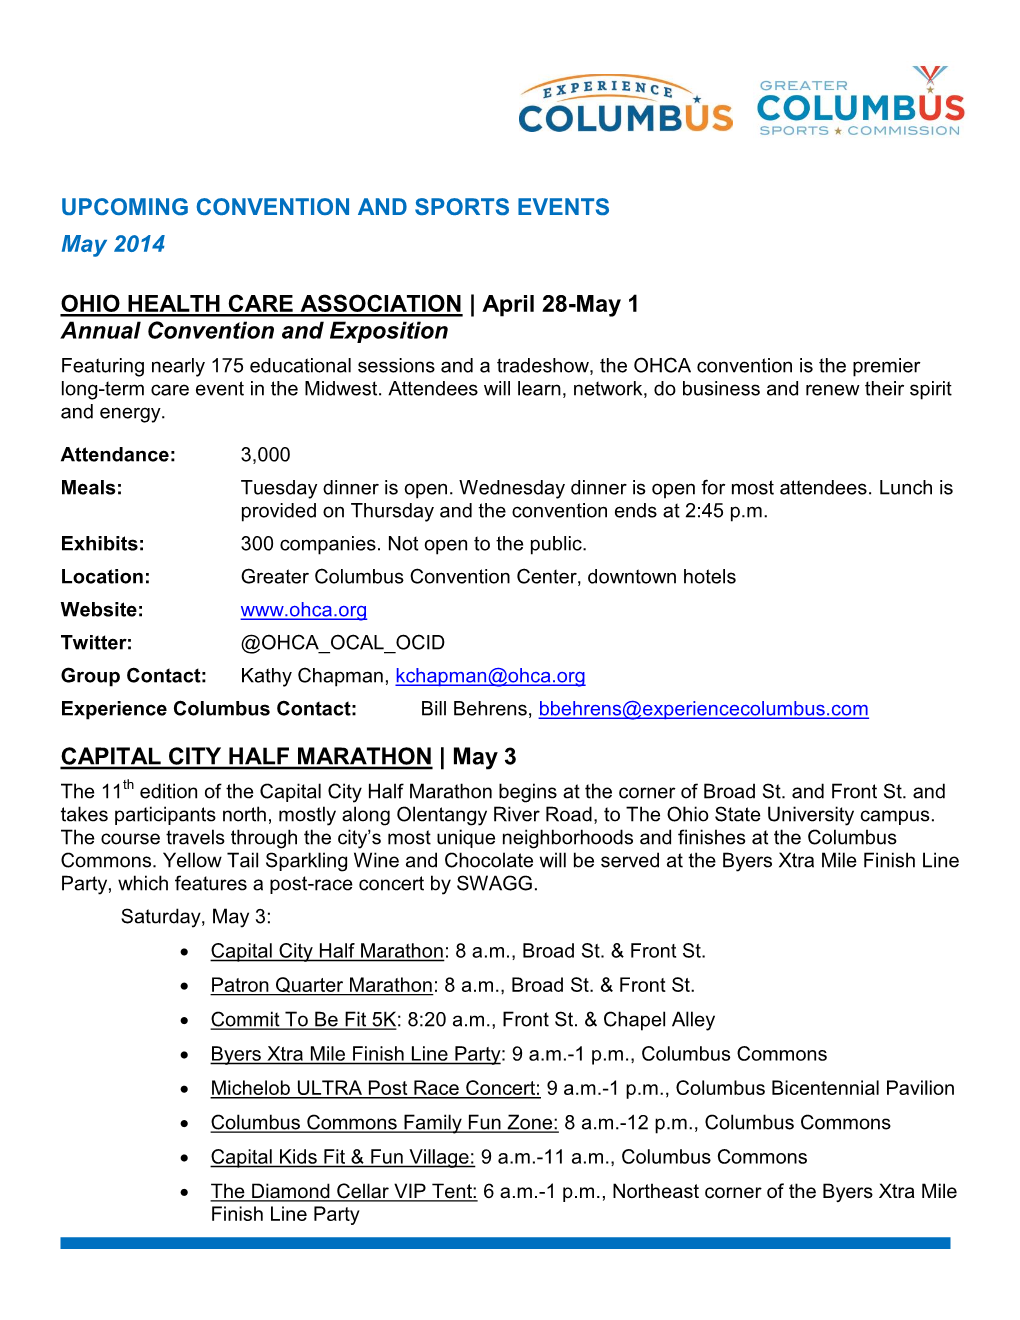 UPCOMING CONVENTION and SPORTS EVENTS May 2014